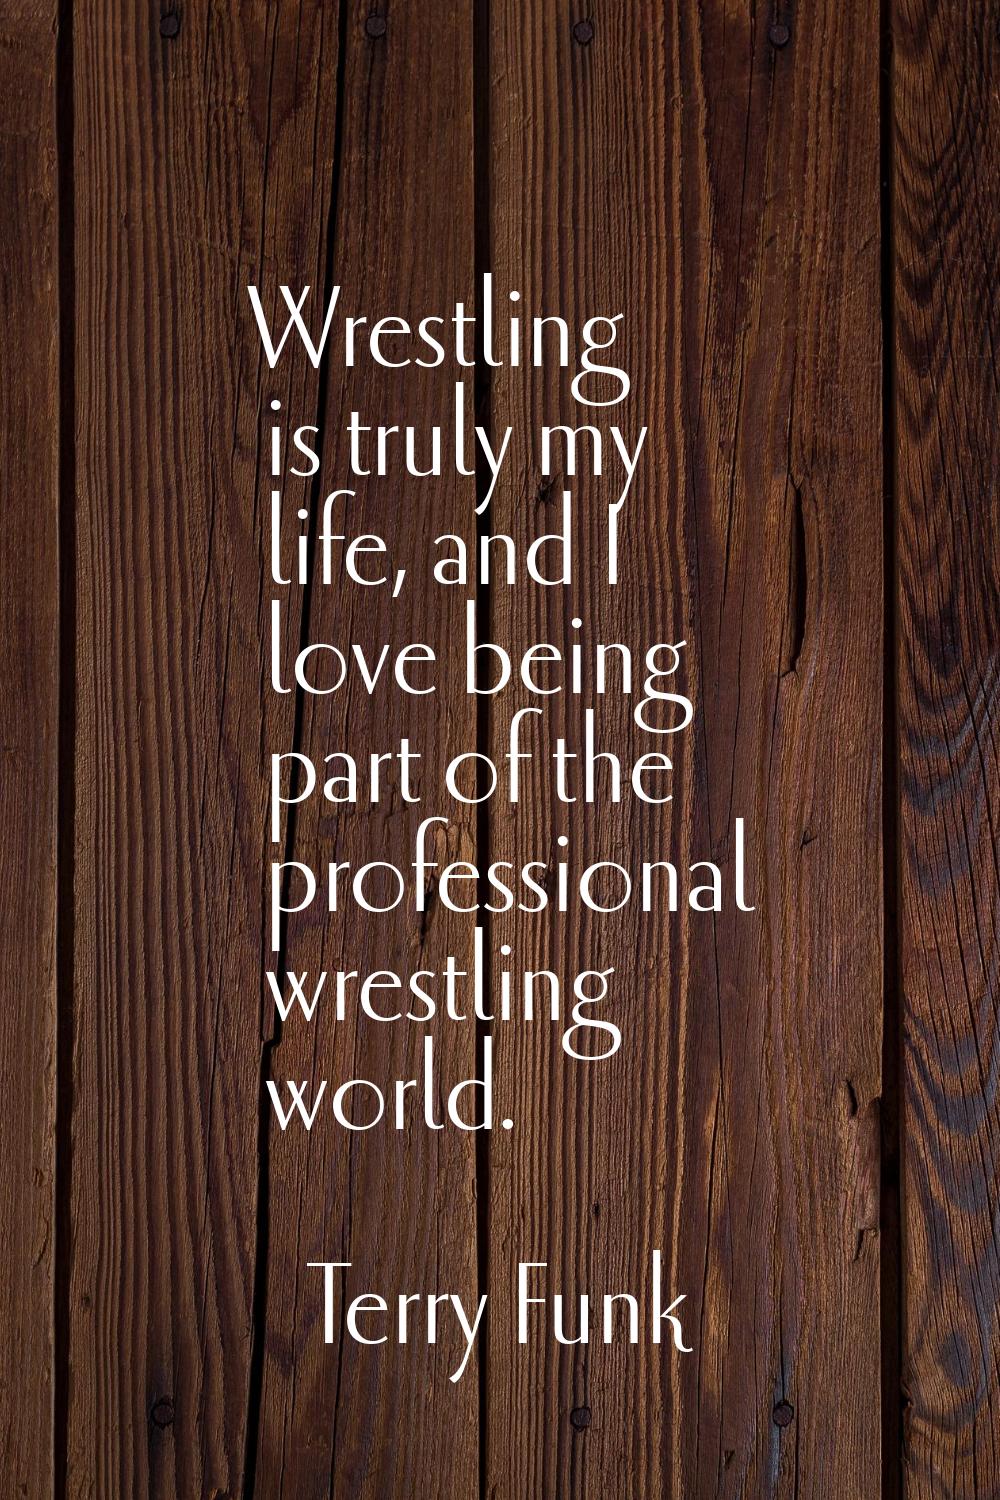 Wrestling is truly my life, and I love being part of the professional wrestling world.